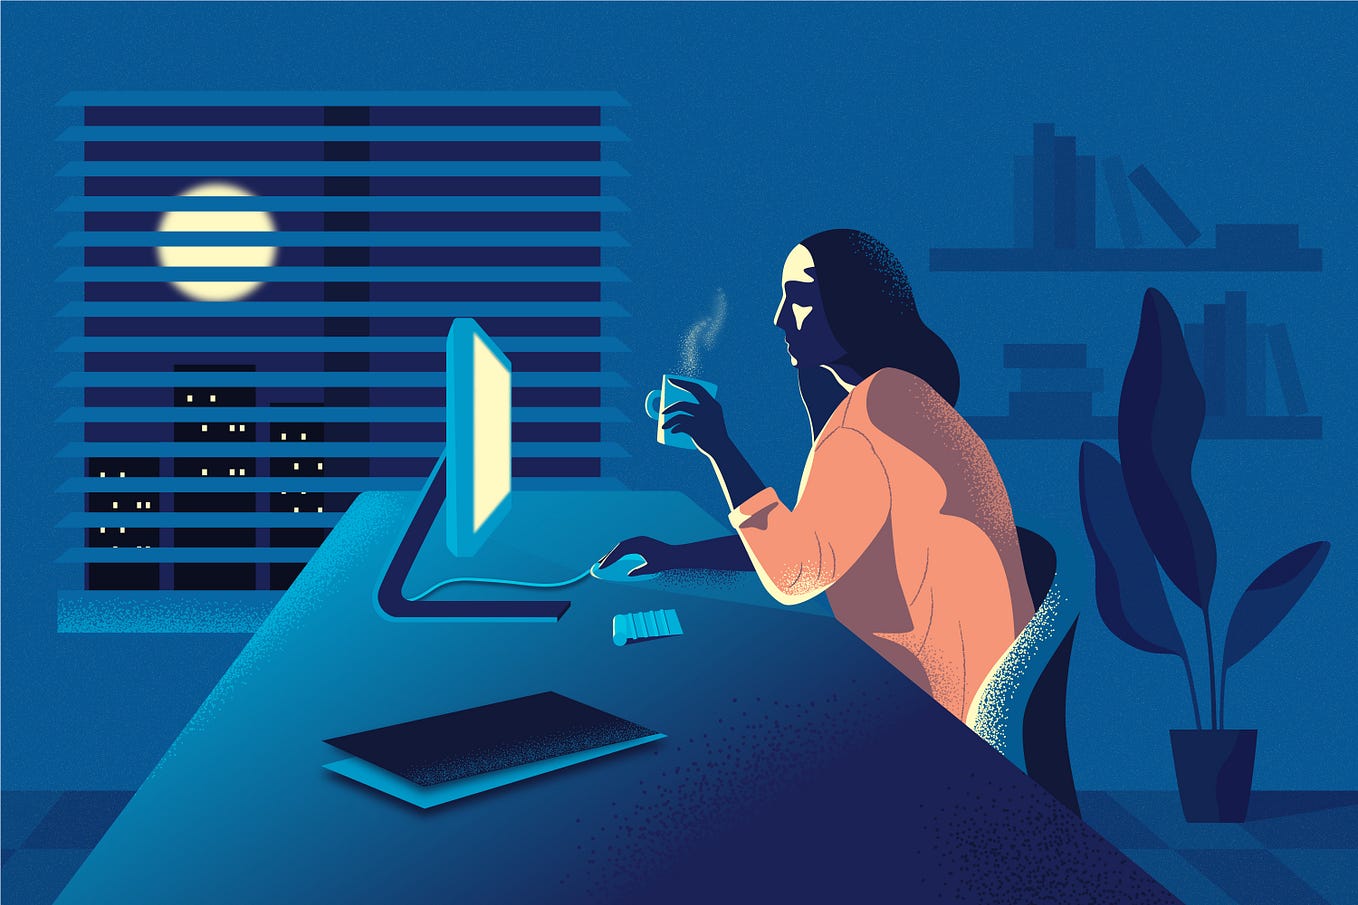 An illustration of a woman holding a cup of coffee and looking at her computer late at night.